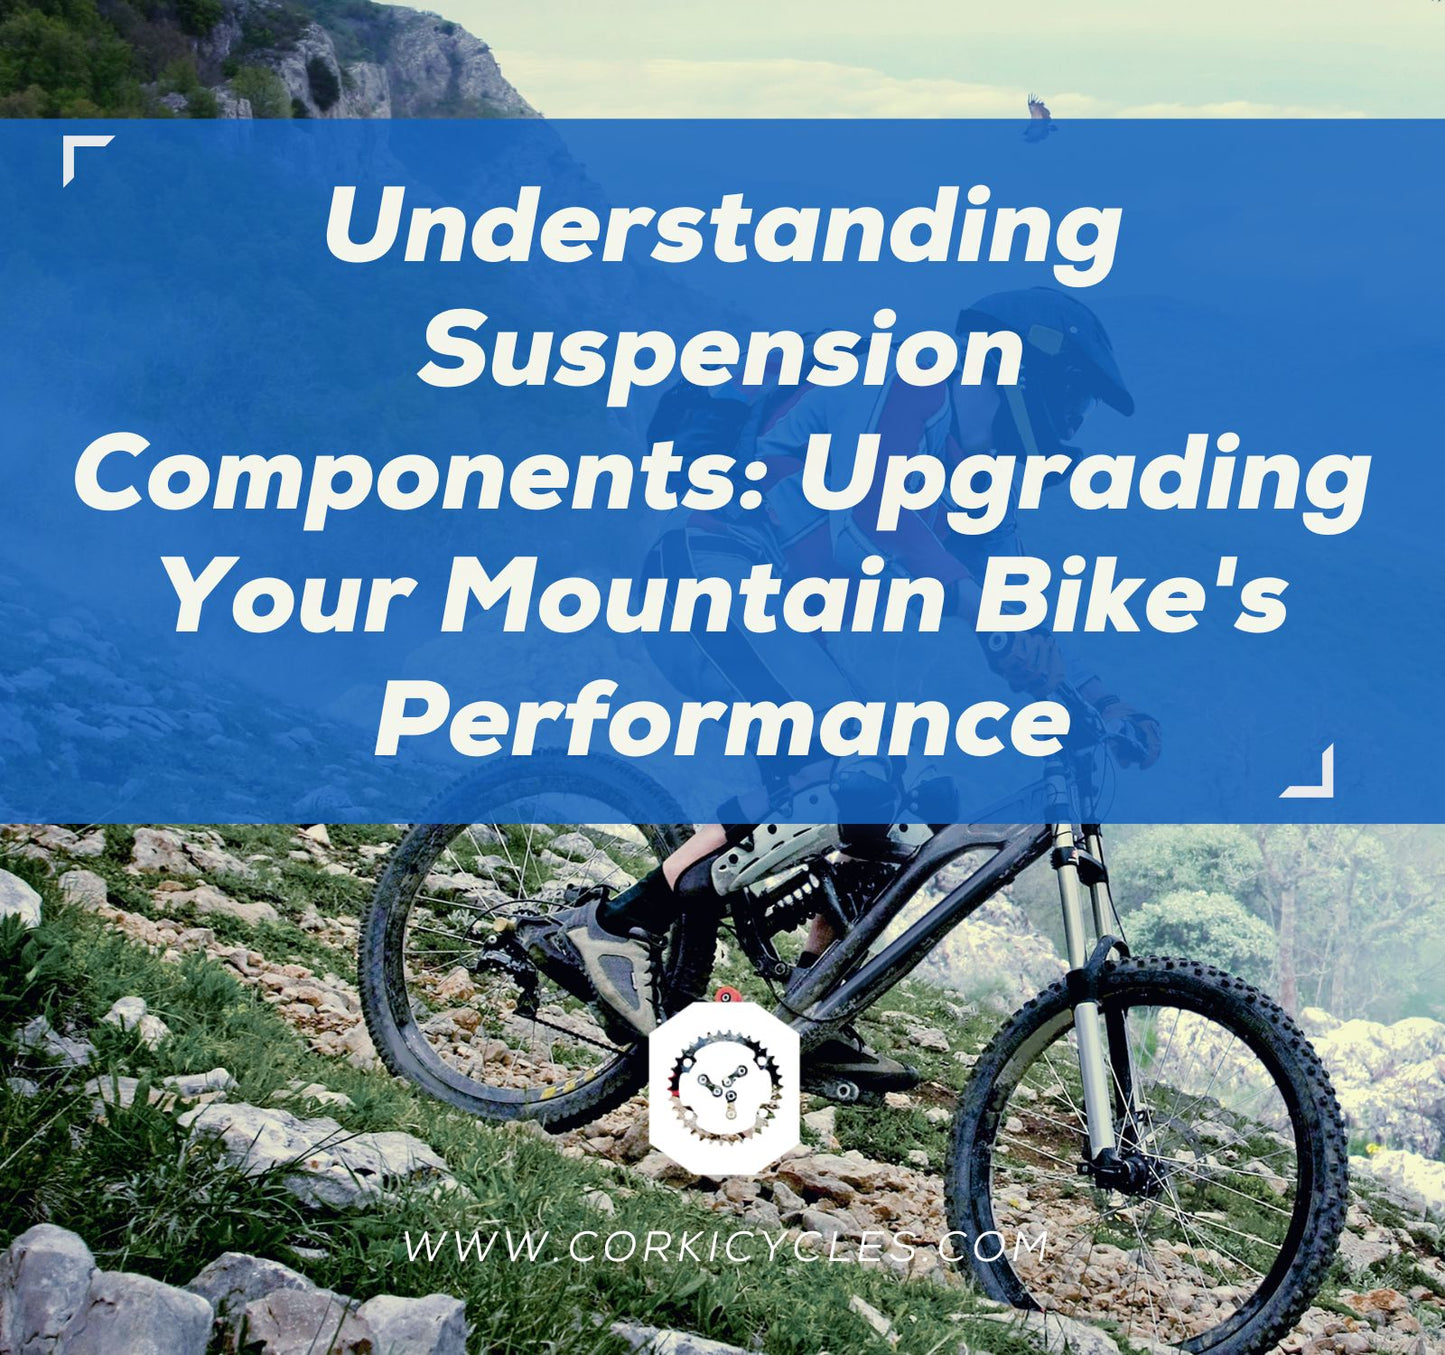 Understanding Suspension Components: Upgrading Your Mountain Bike's Performance